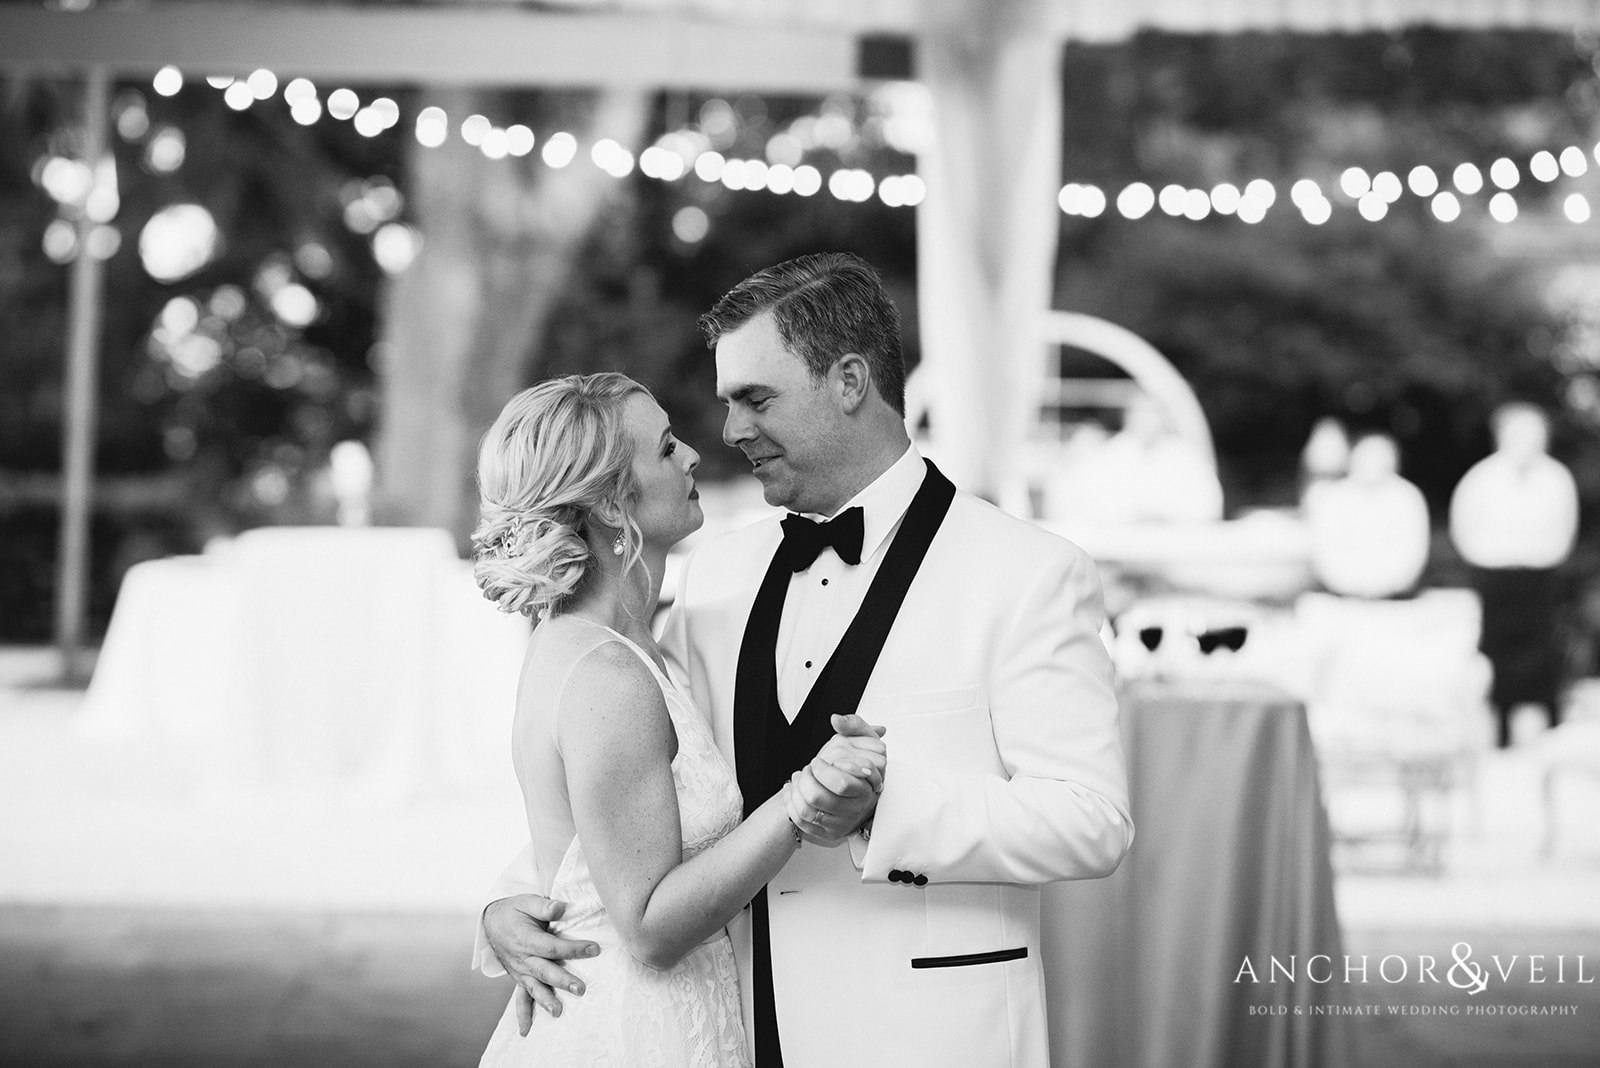 The Couple's first dance at the Lowndes Grove Plantation Wedding